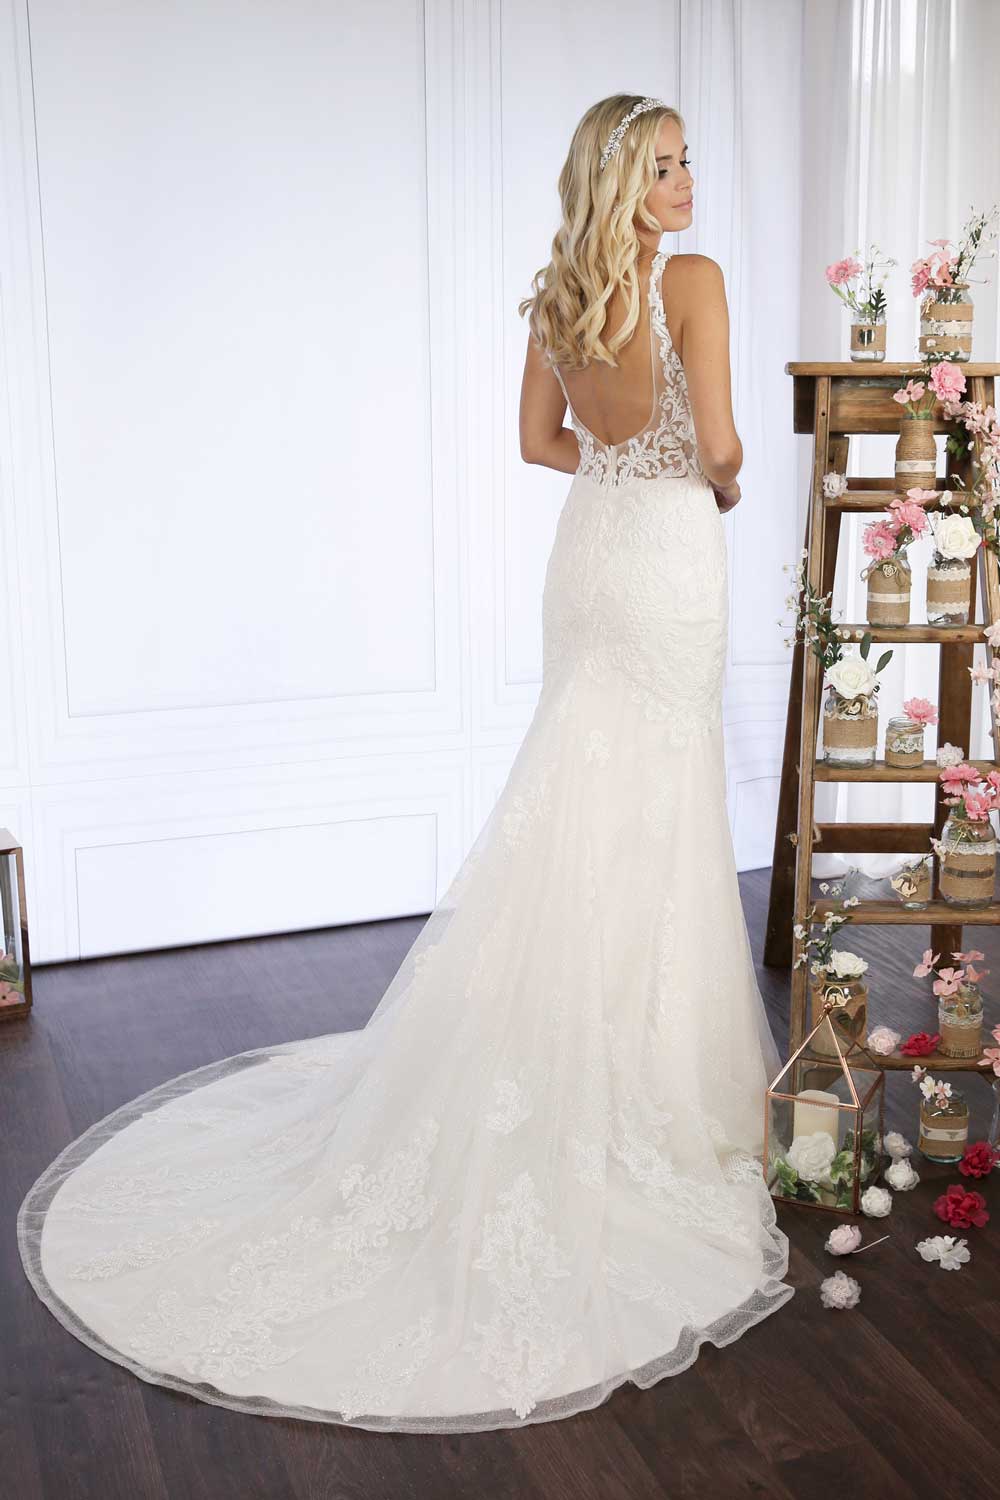 Bridal gown rear view